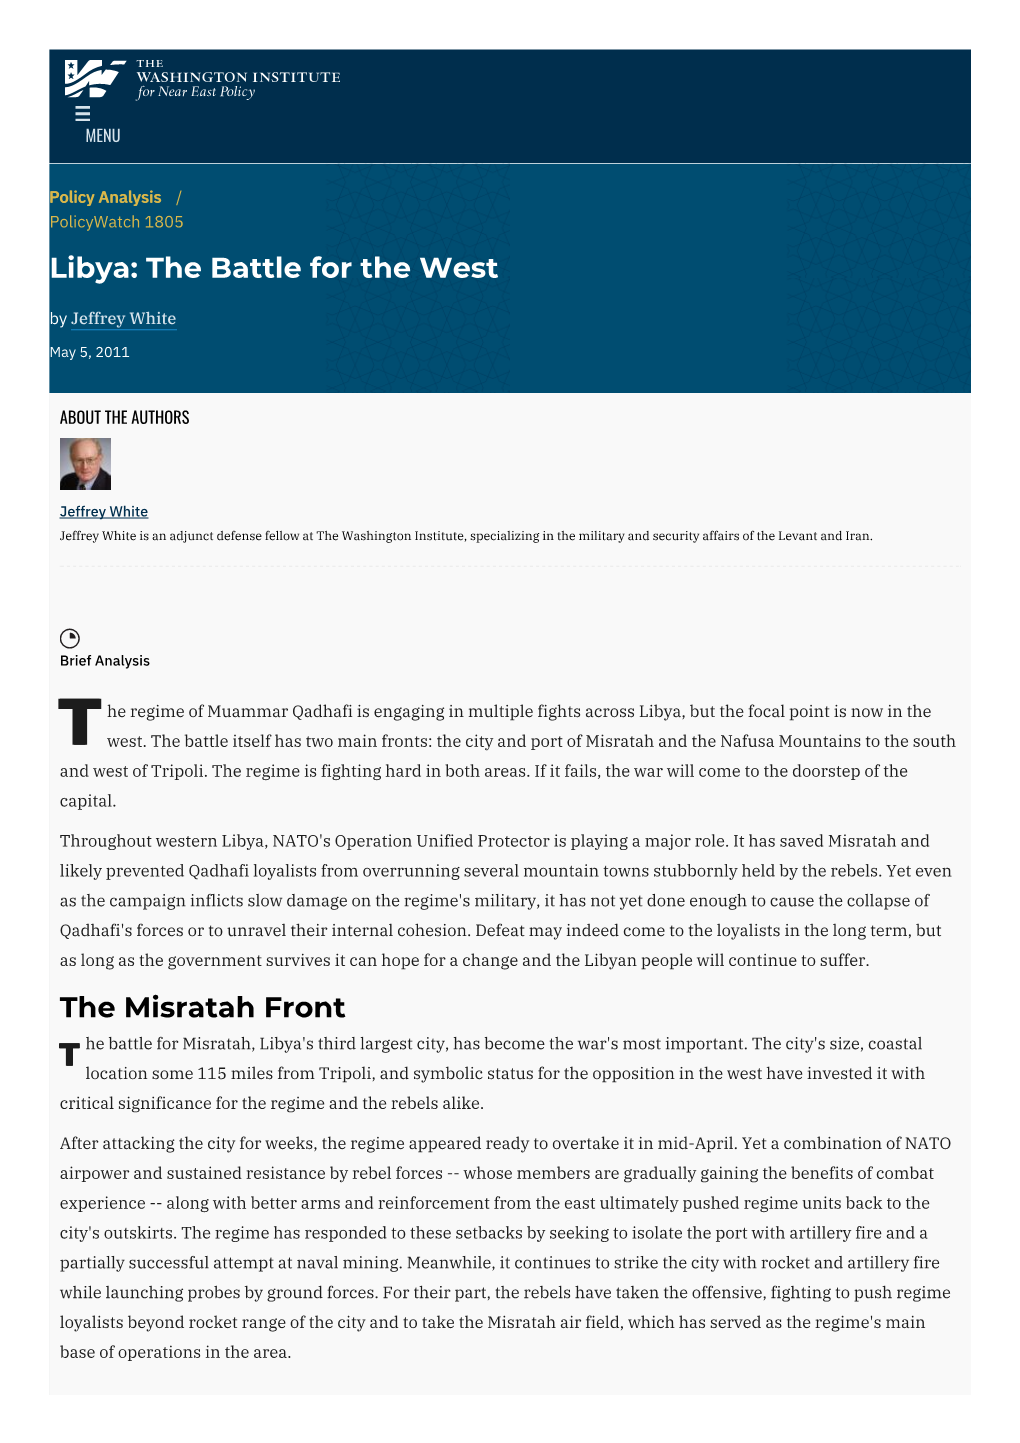 Libya: the Battle for the West | the Washington Institute